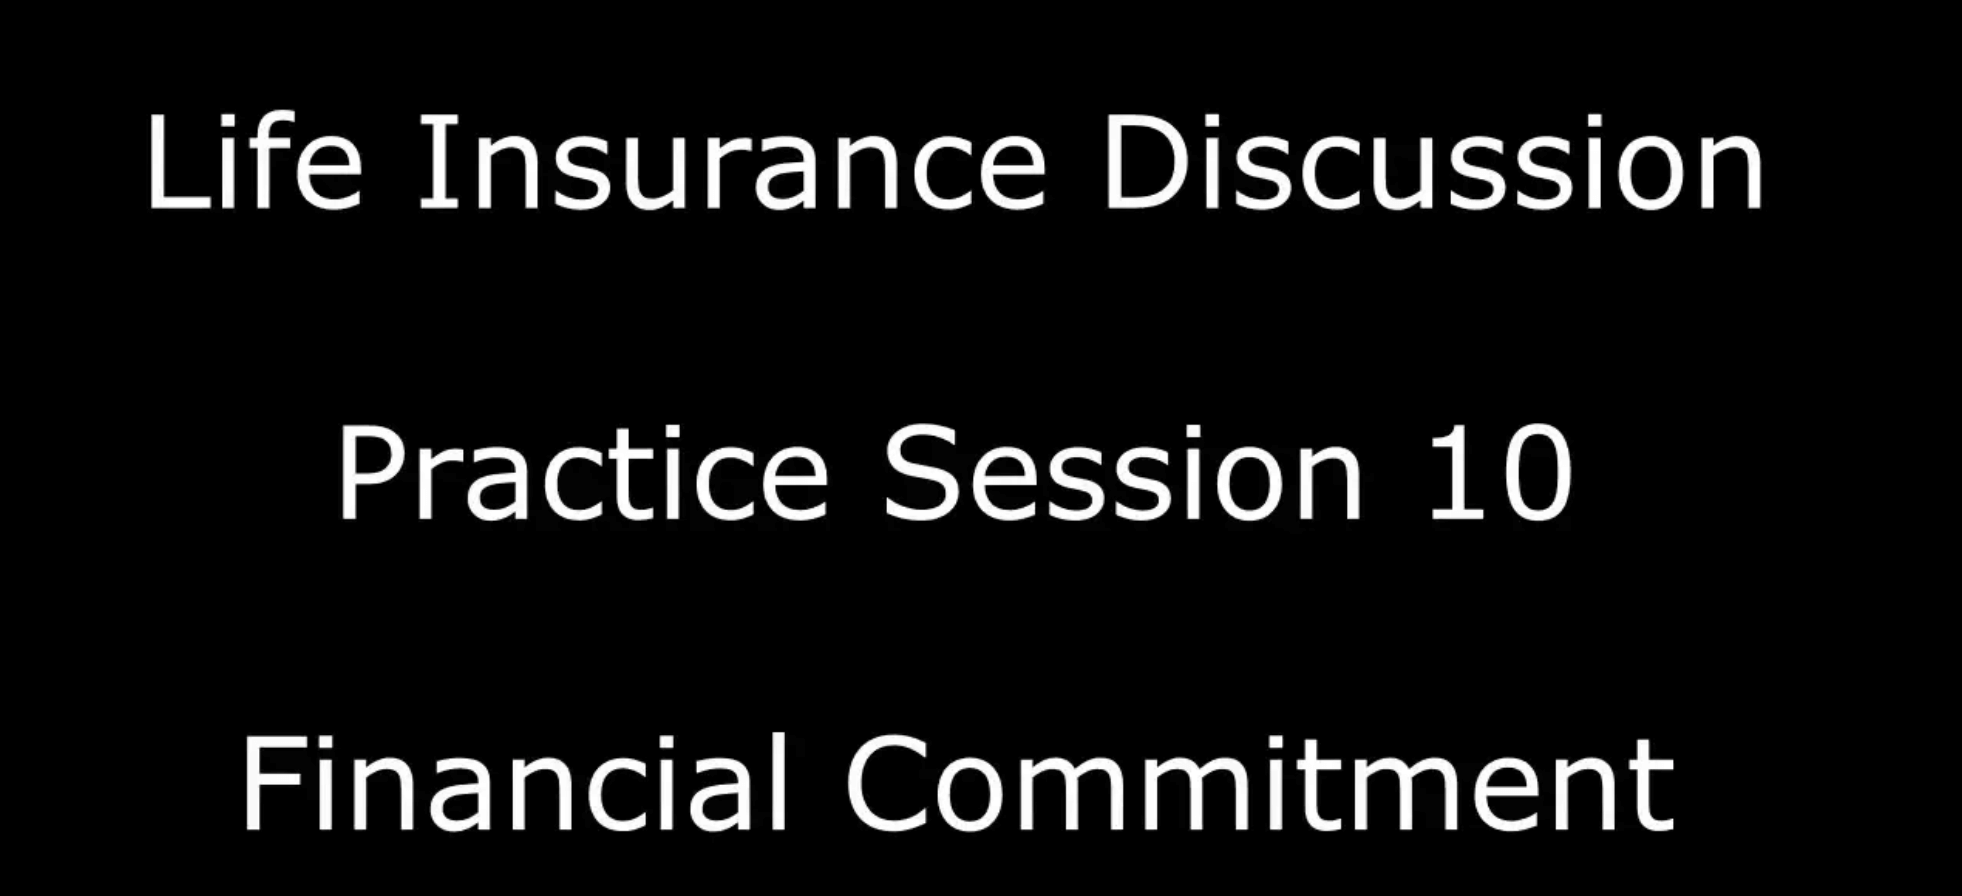 life-insurance-discussion-practice-session-ten